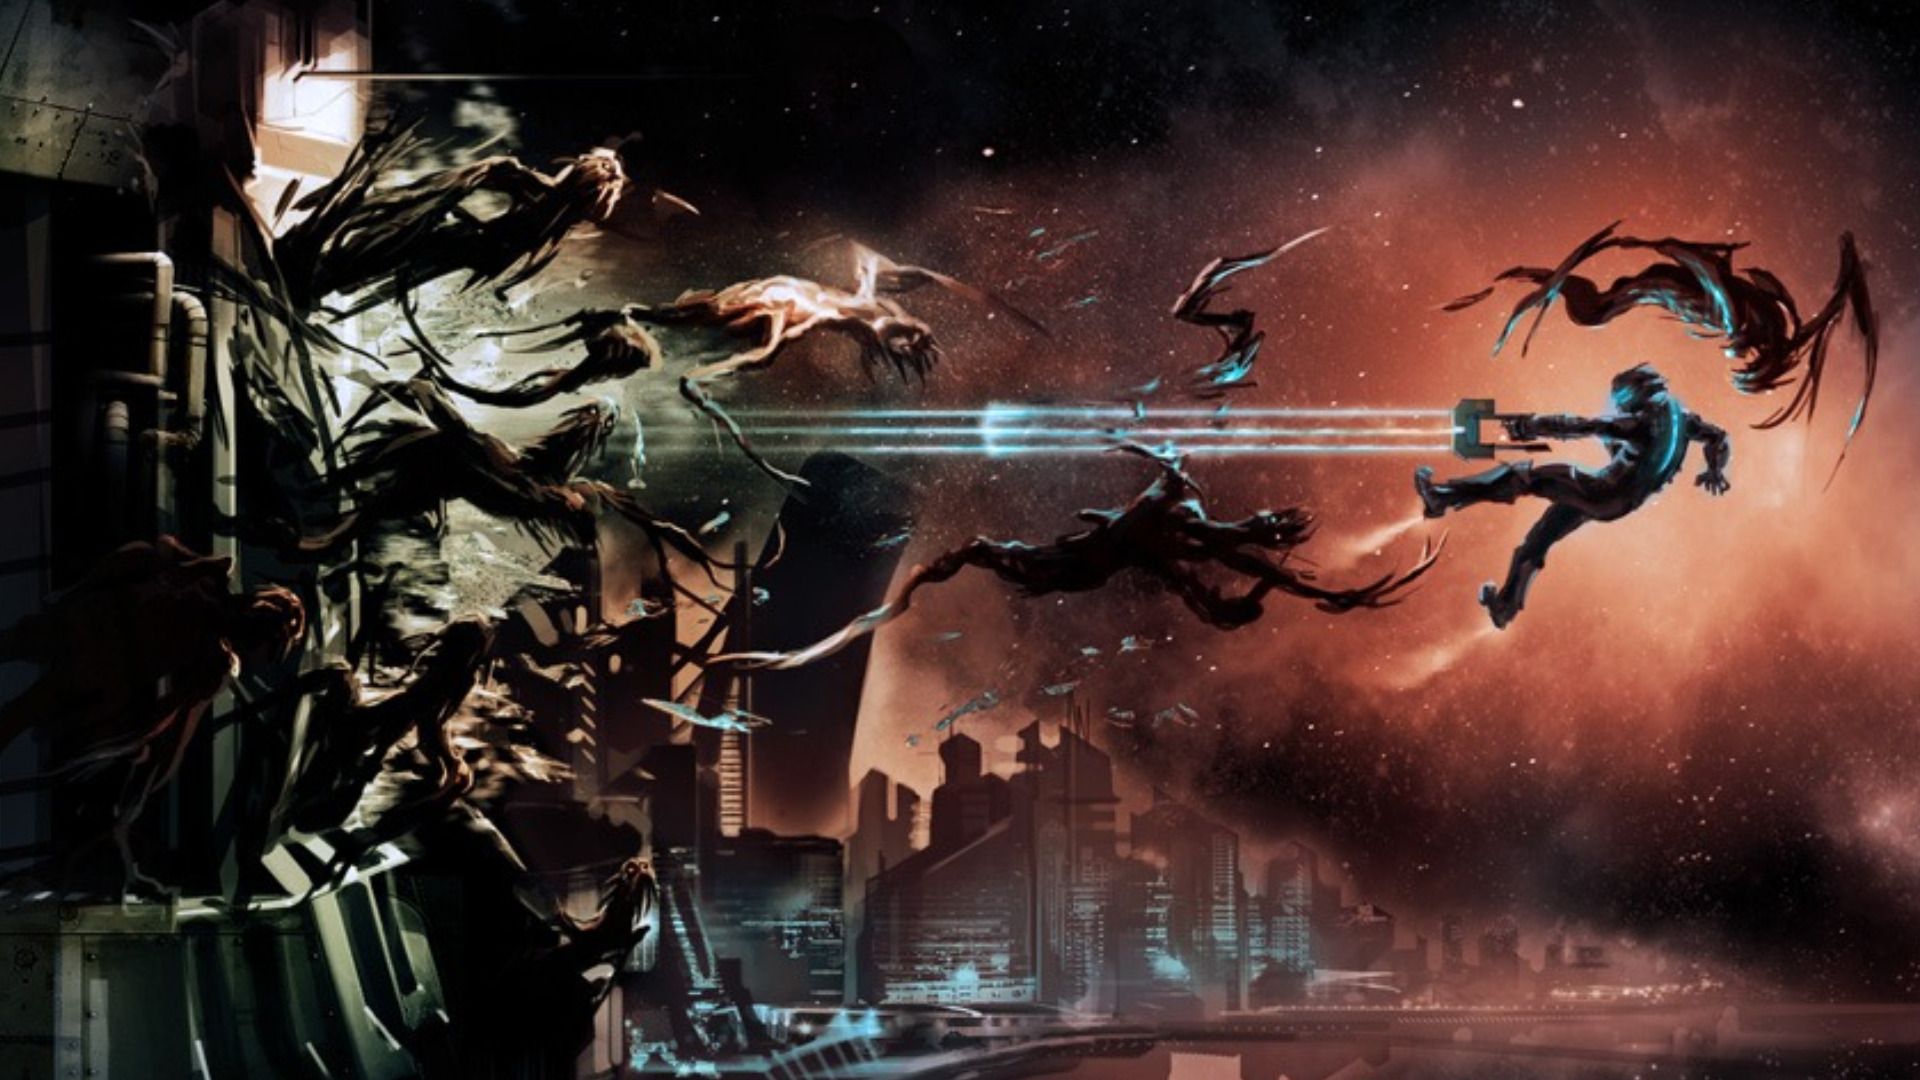 86 Dead Space 2 HD Wallpapers | Backgrounds - Wallpaper Abyss